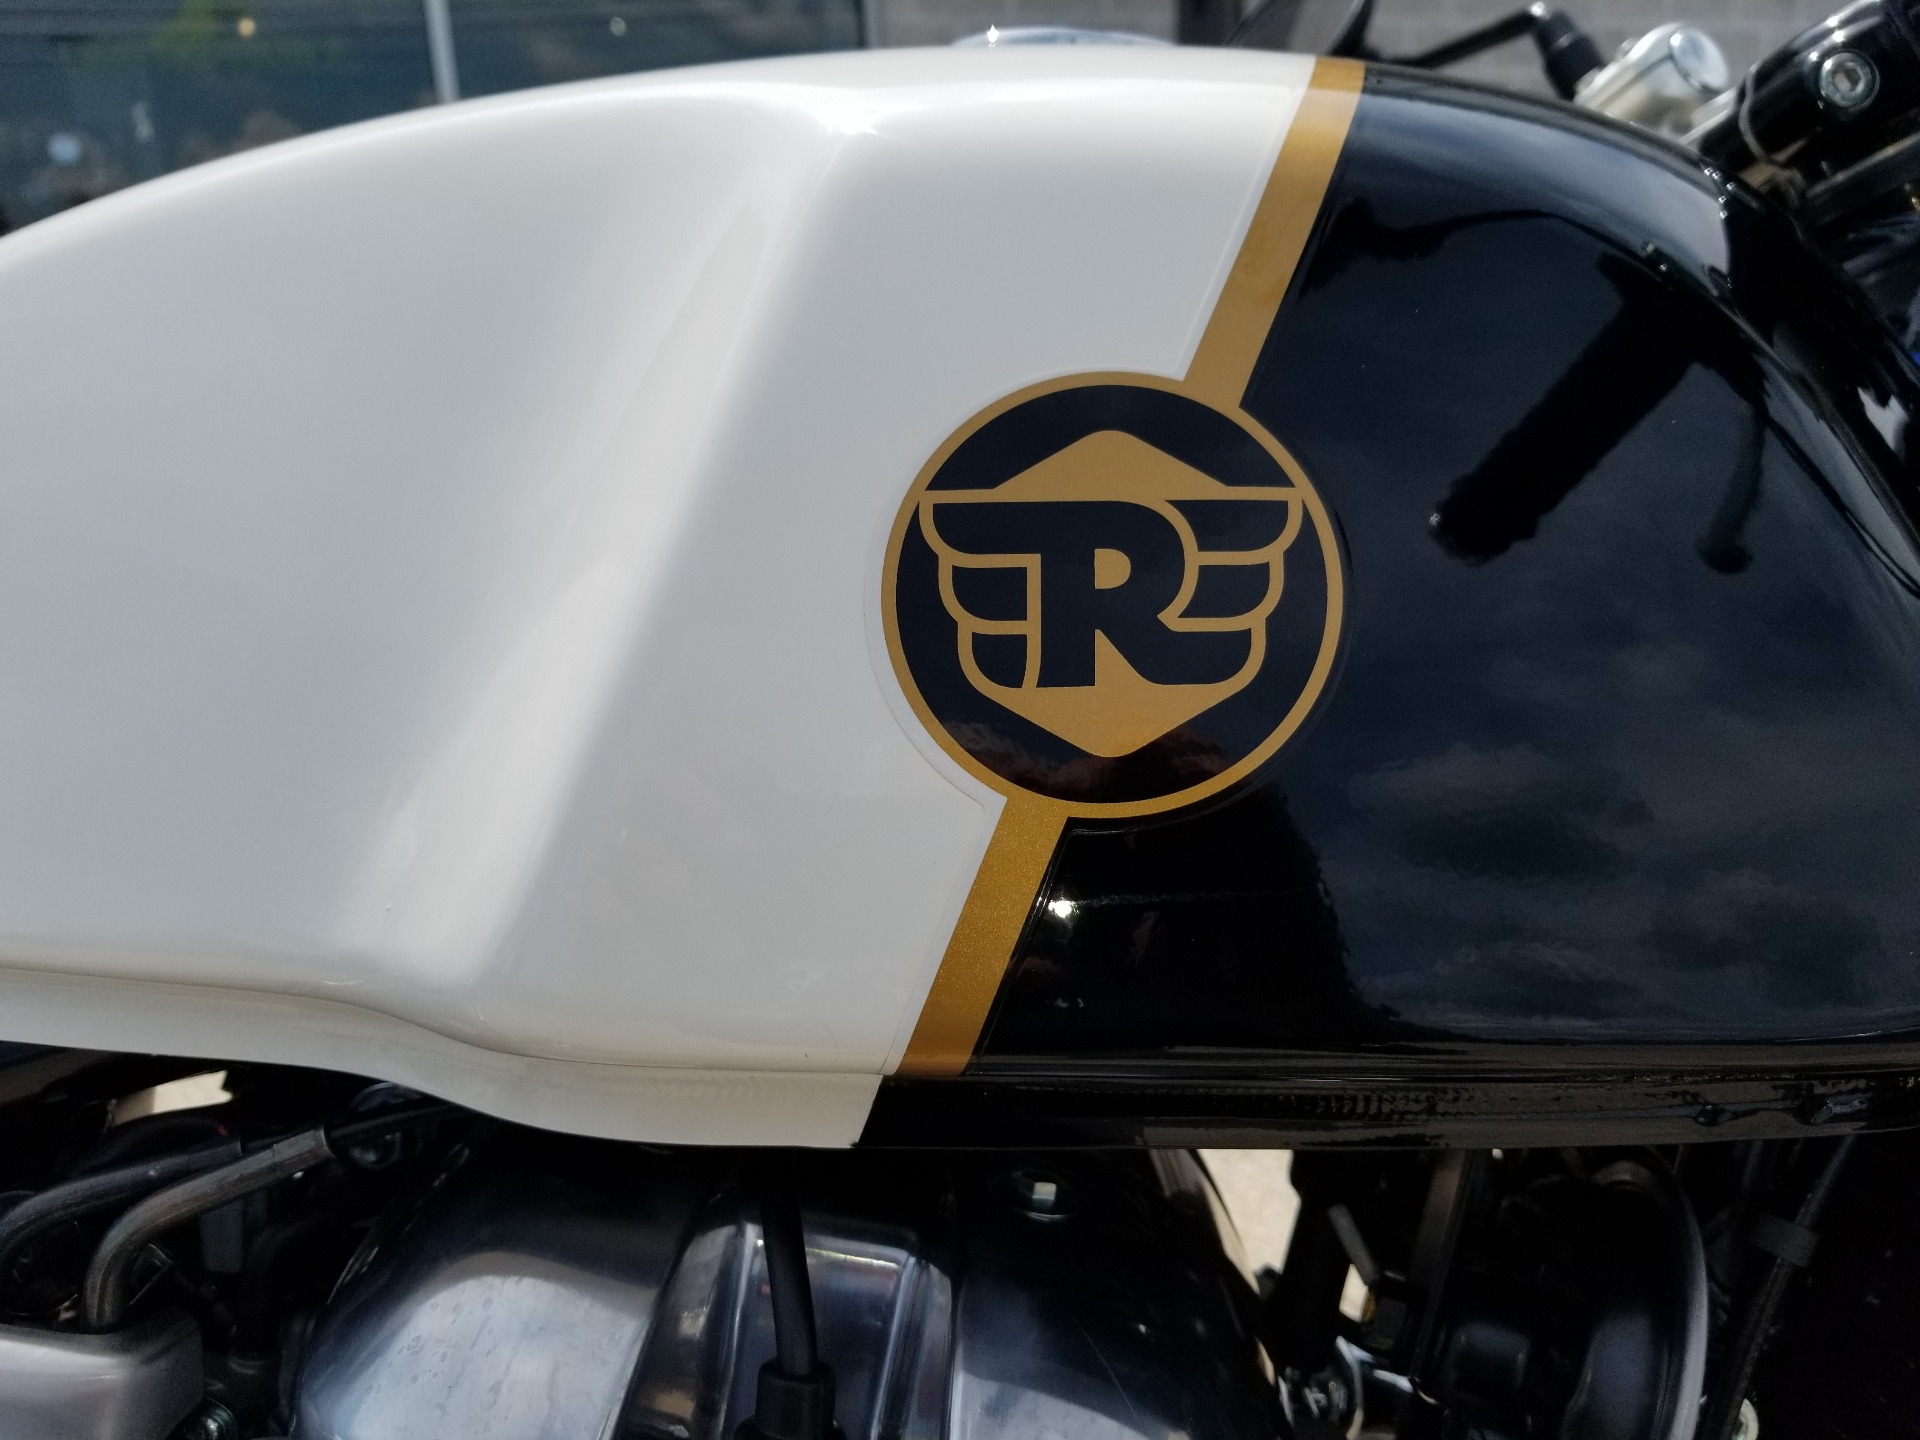 2022 Royal Enfield Continental GT 650 in Aurora, Ohio - Photo 3